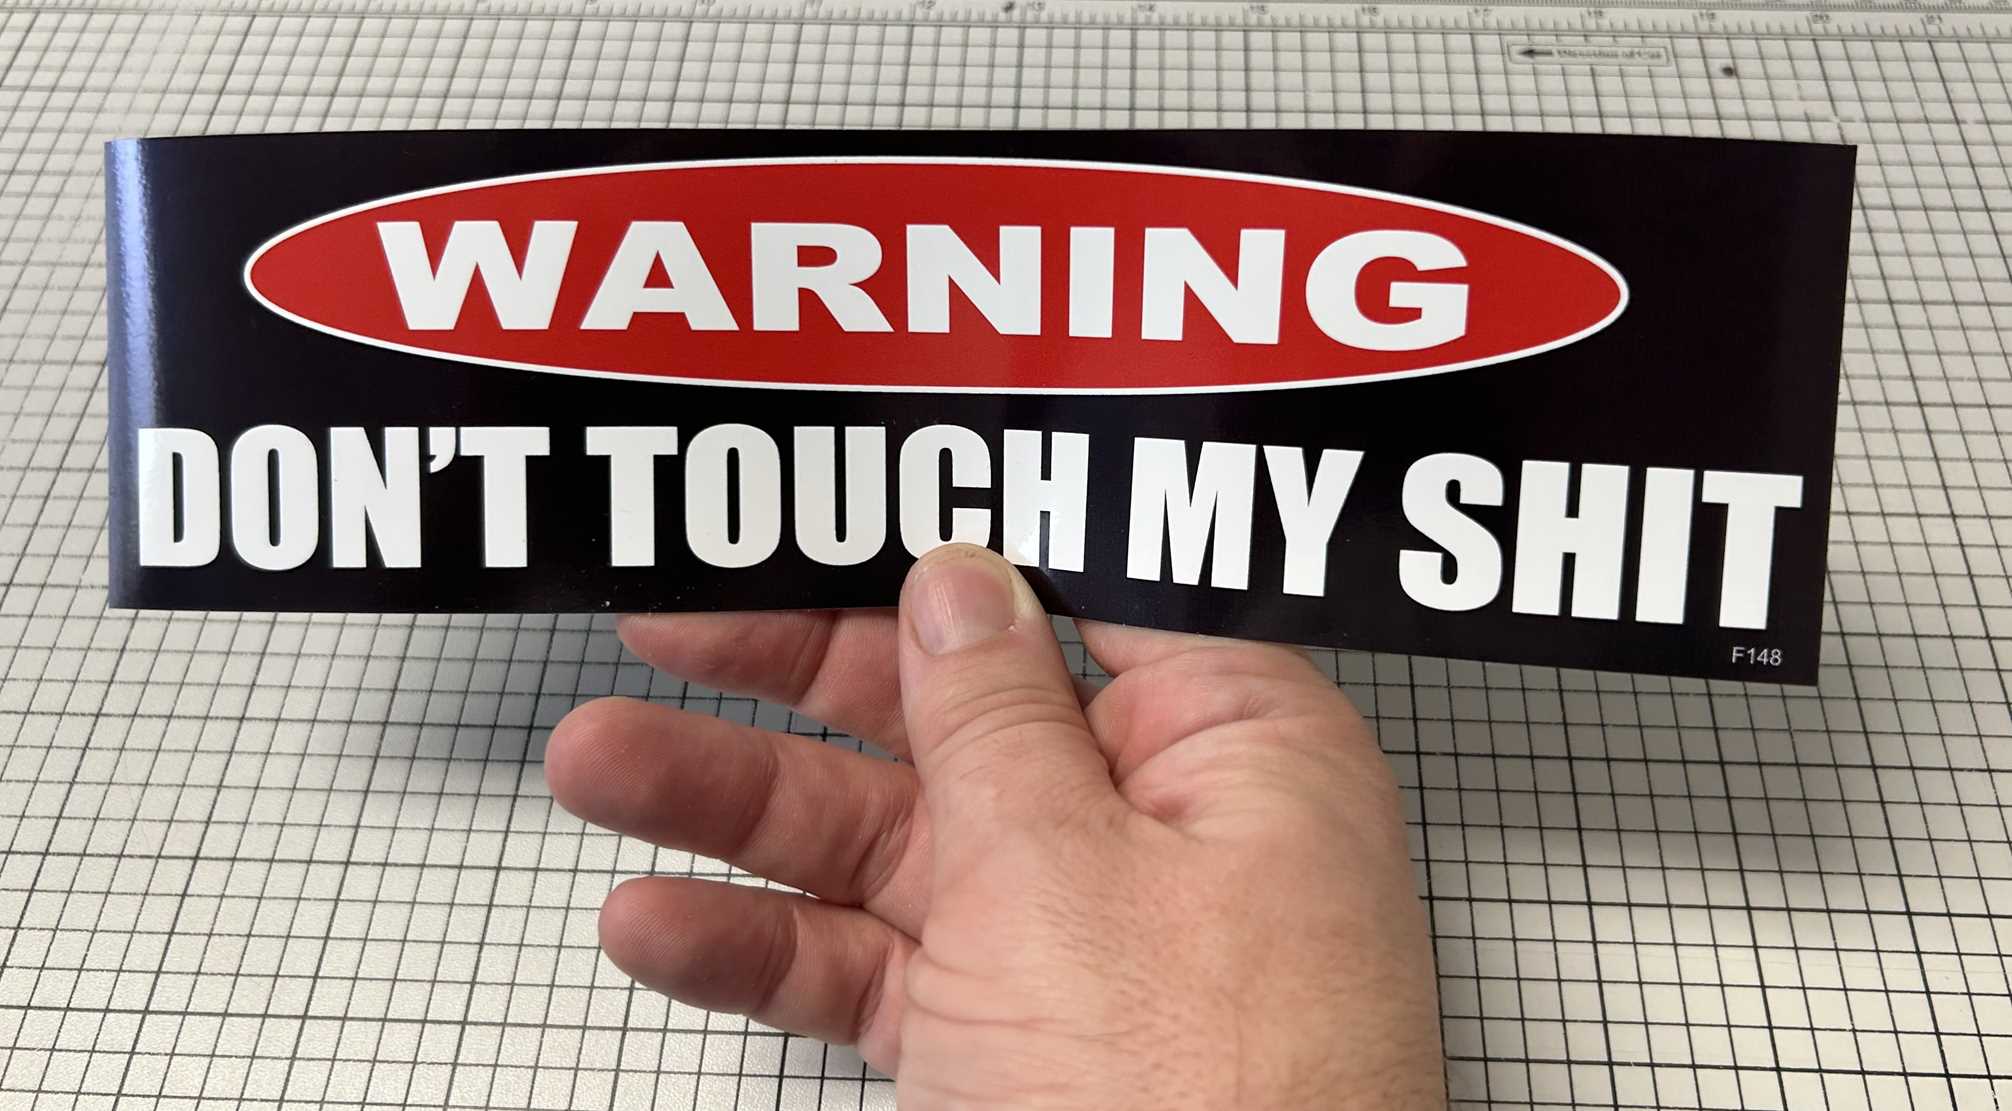 WARNING: DON'T TOUCH MY SHIT CAR MAGNET IN HAND